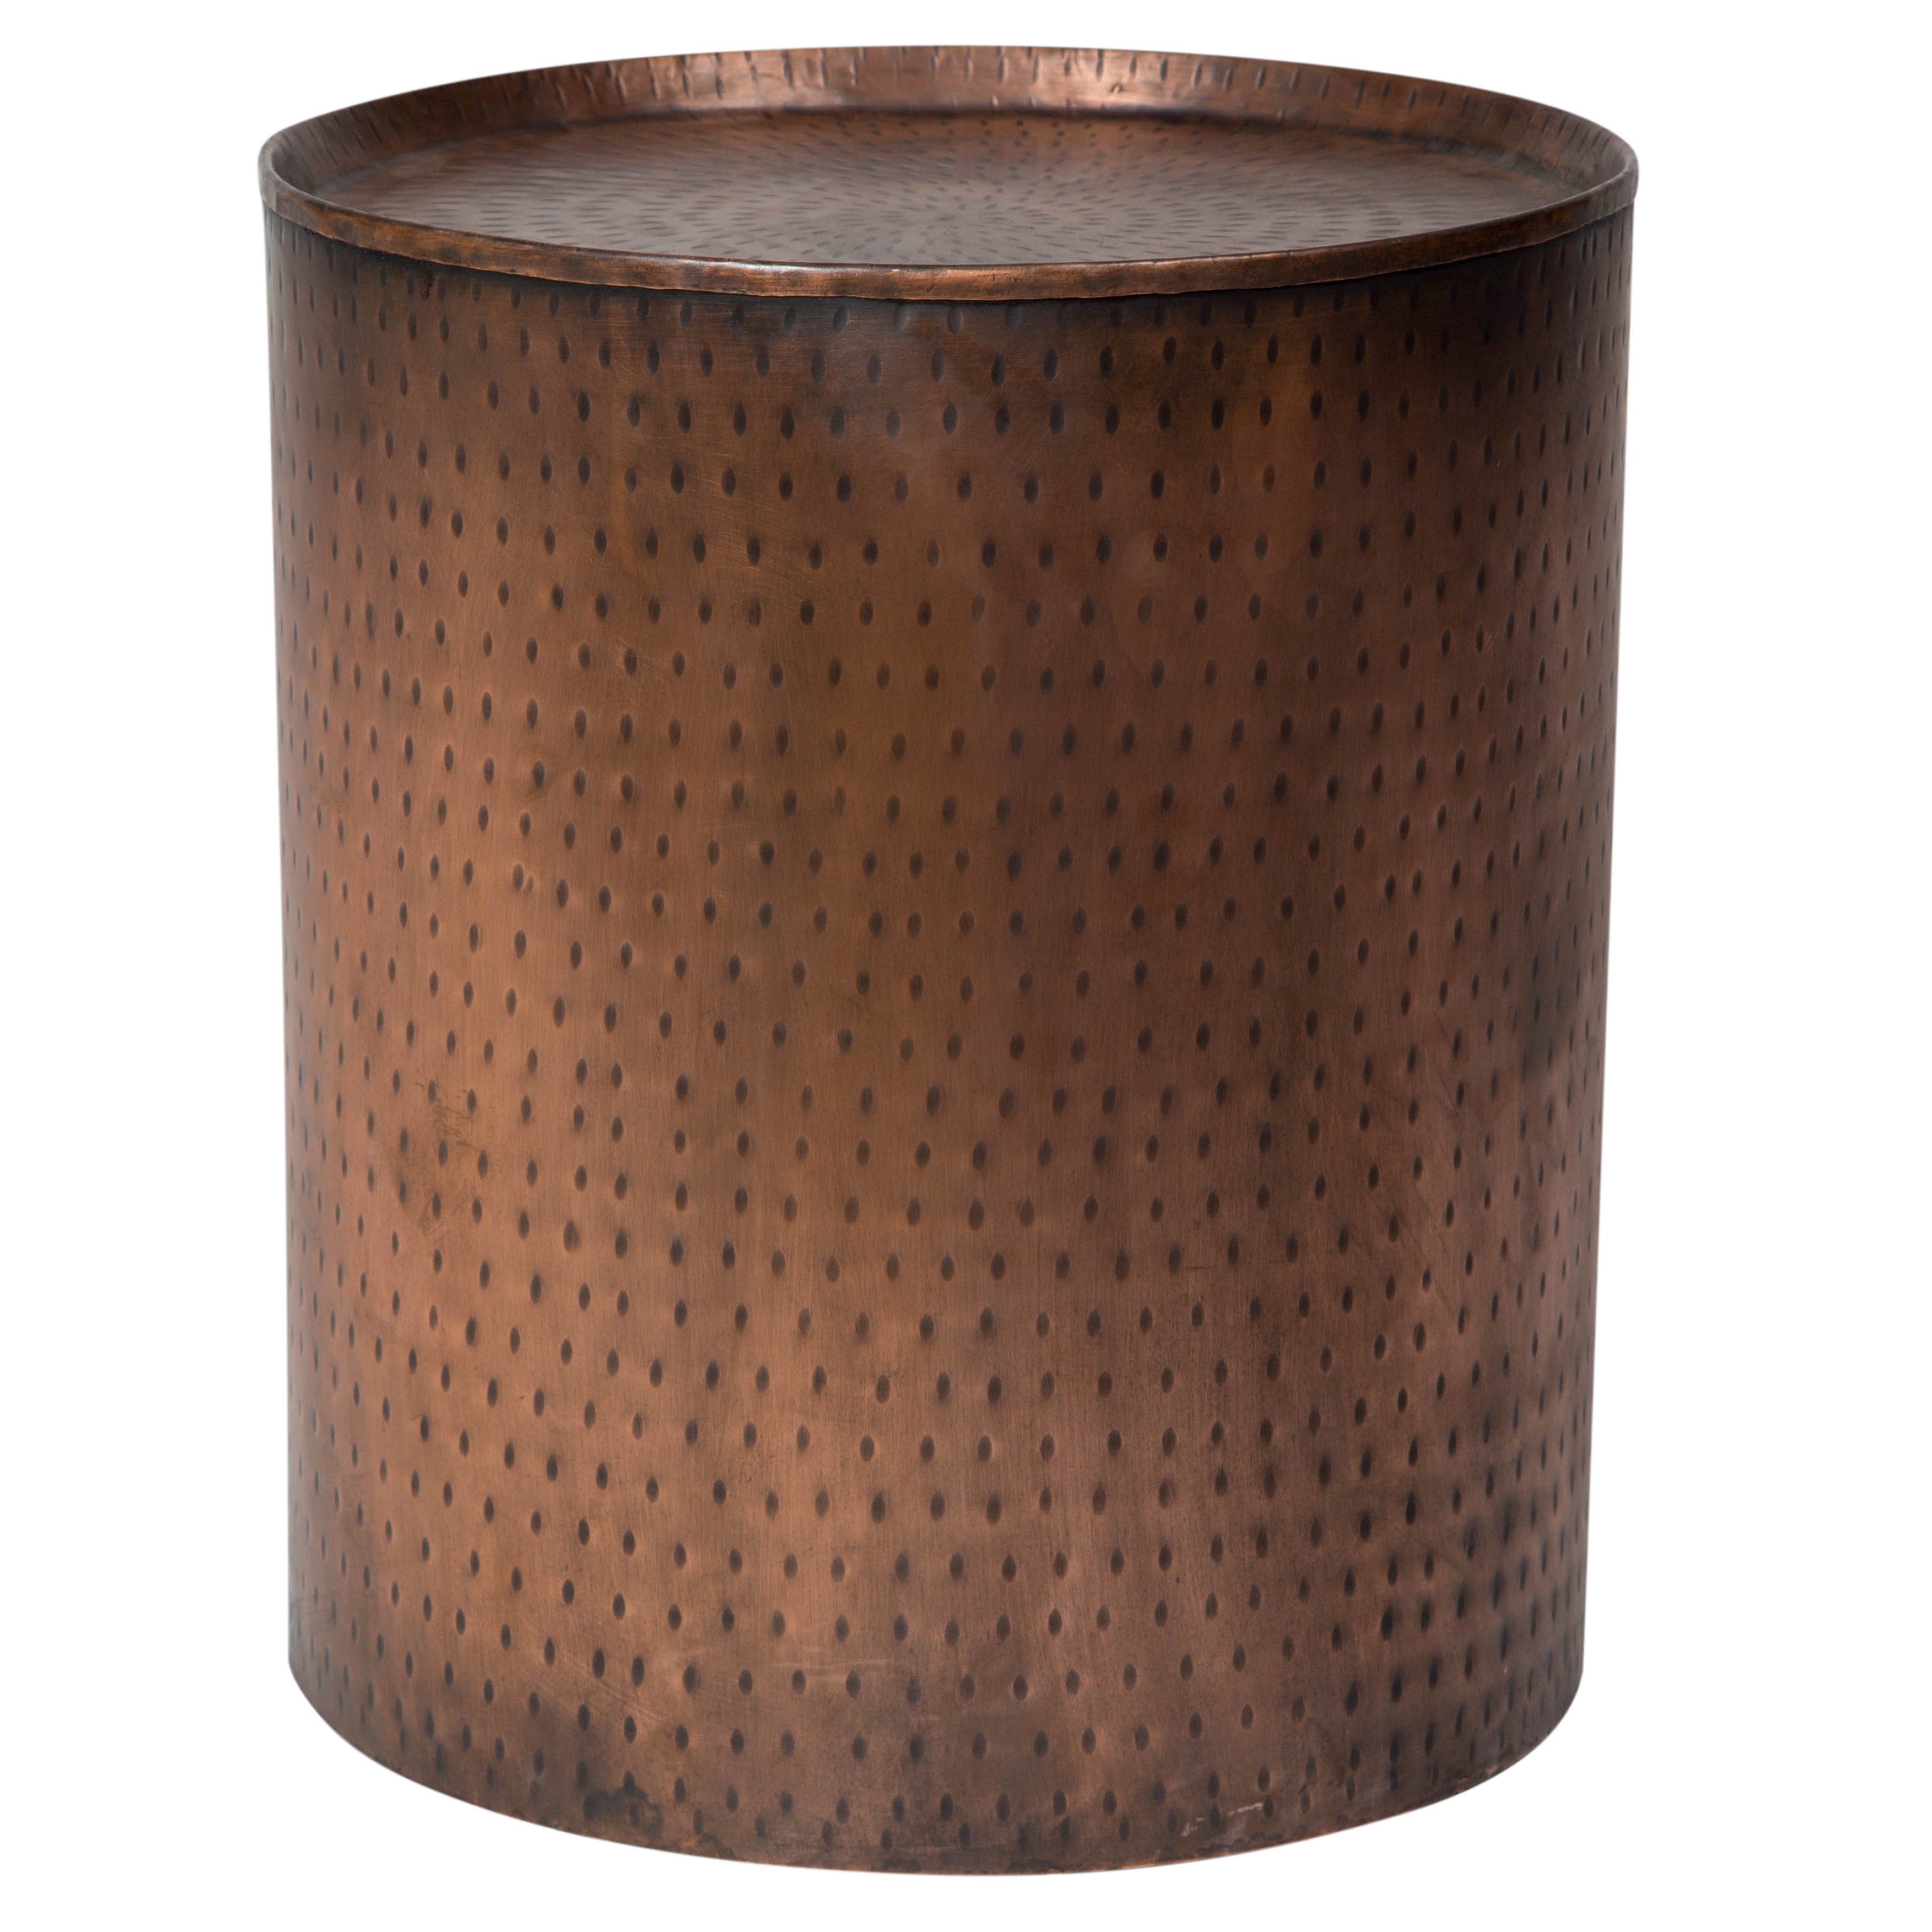 handmade wanderloot rotonde hammered antique copper metal industrial round side table drum accent end free shipping today nautical wall lights indoor heavy duty umbrella stand